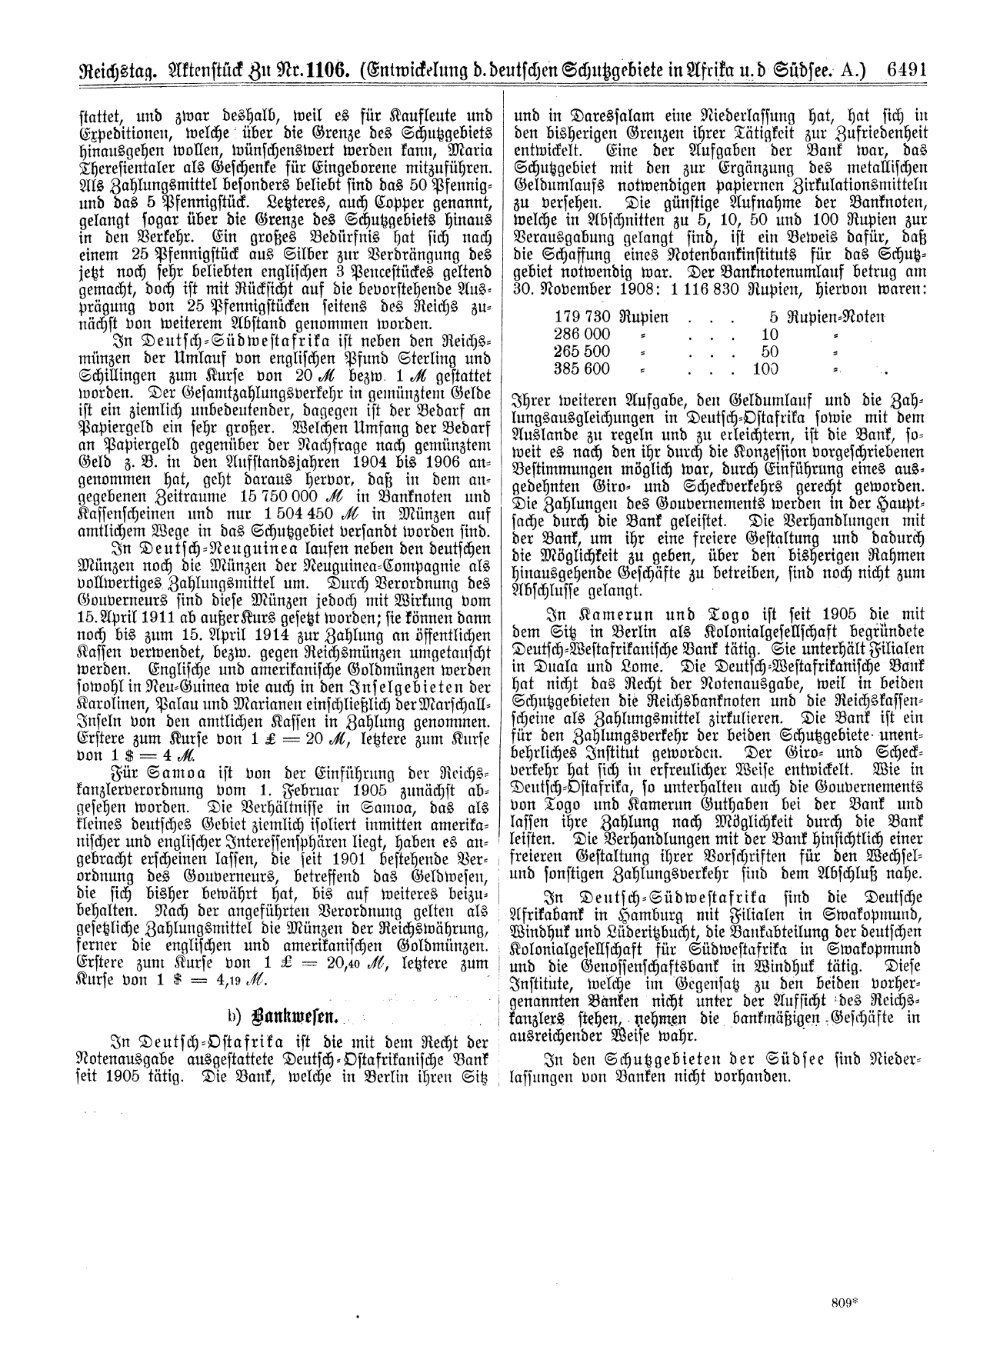 Scan of page 6491